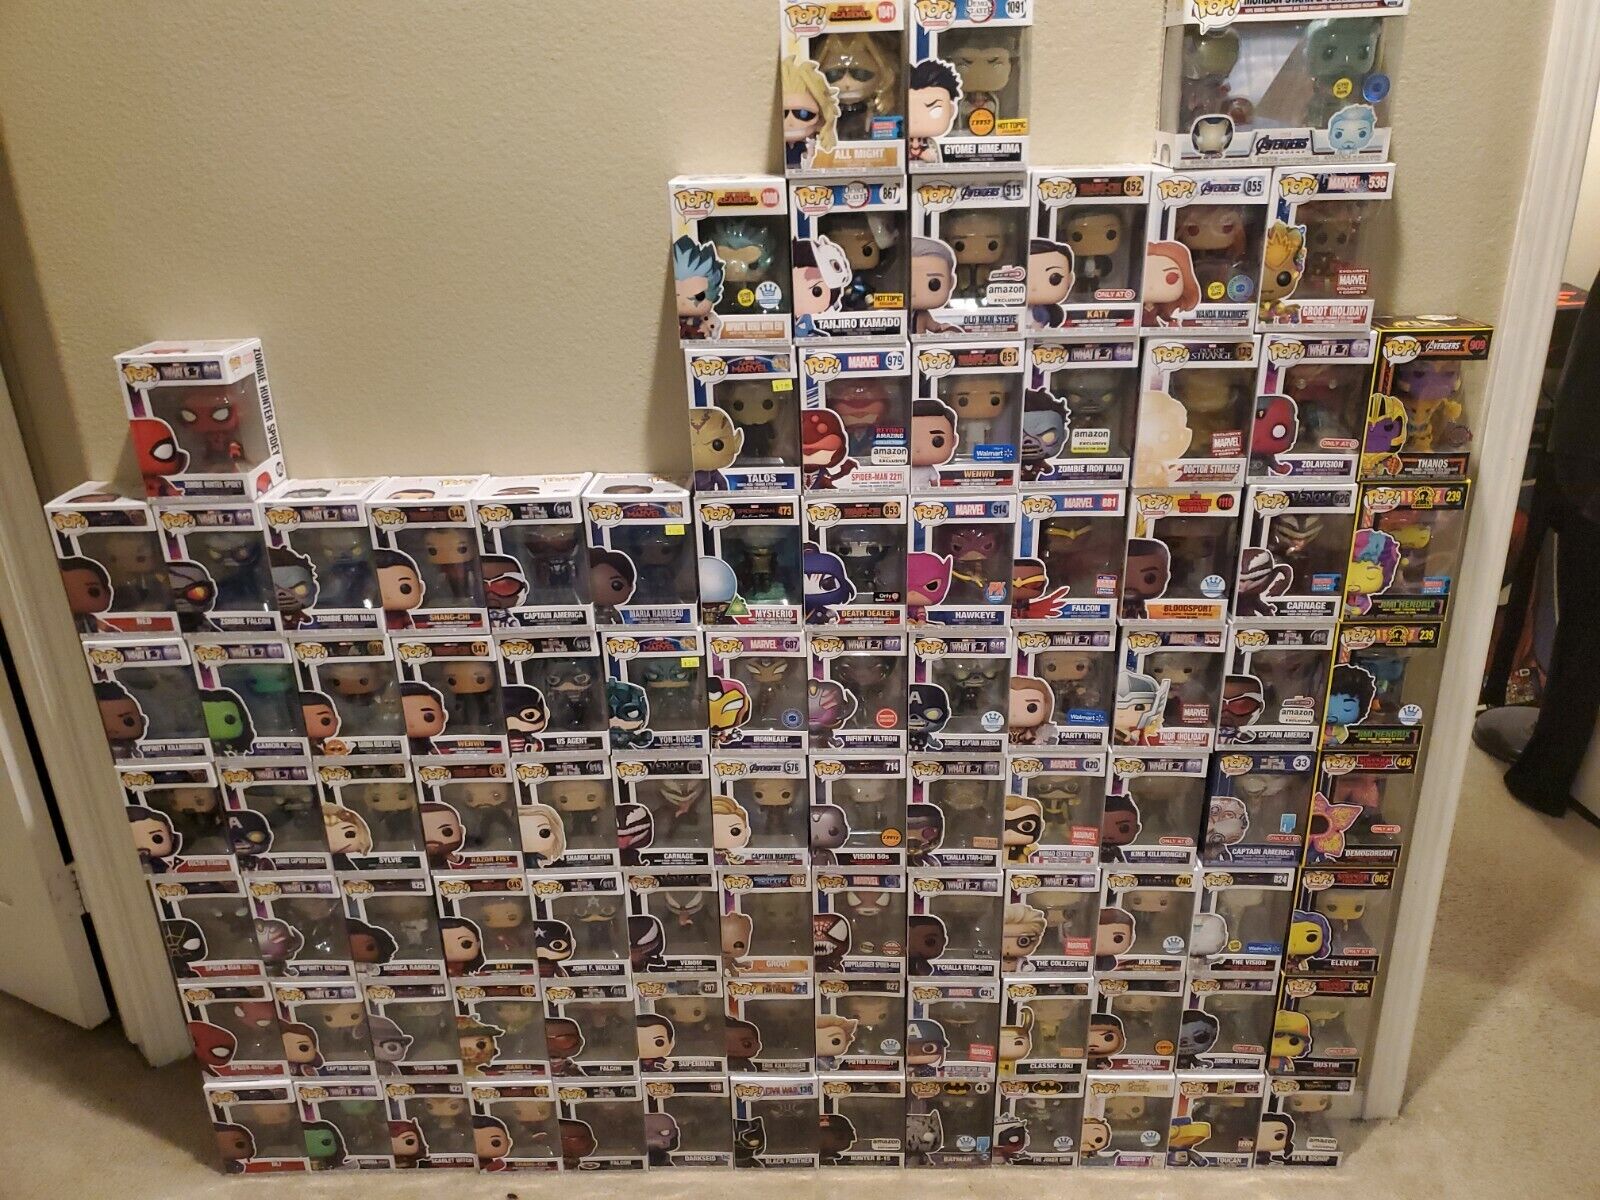  Huge Bulk Sale Funko Pop And Soda Collection Or I Can Sell Individually.